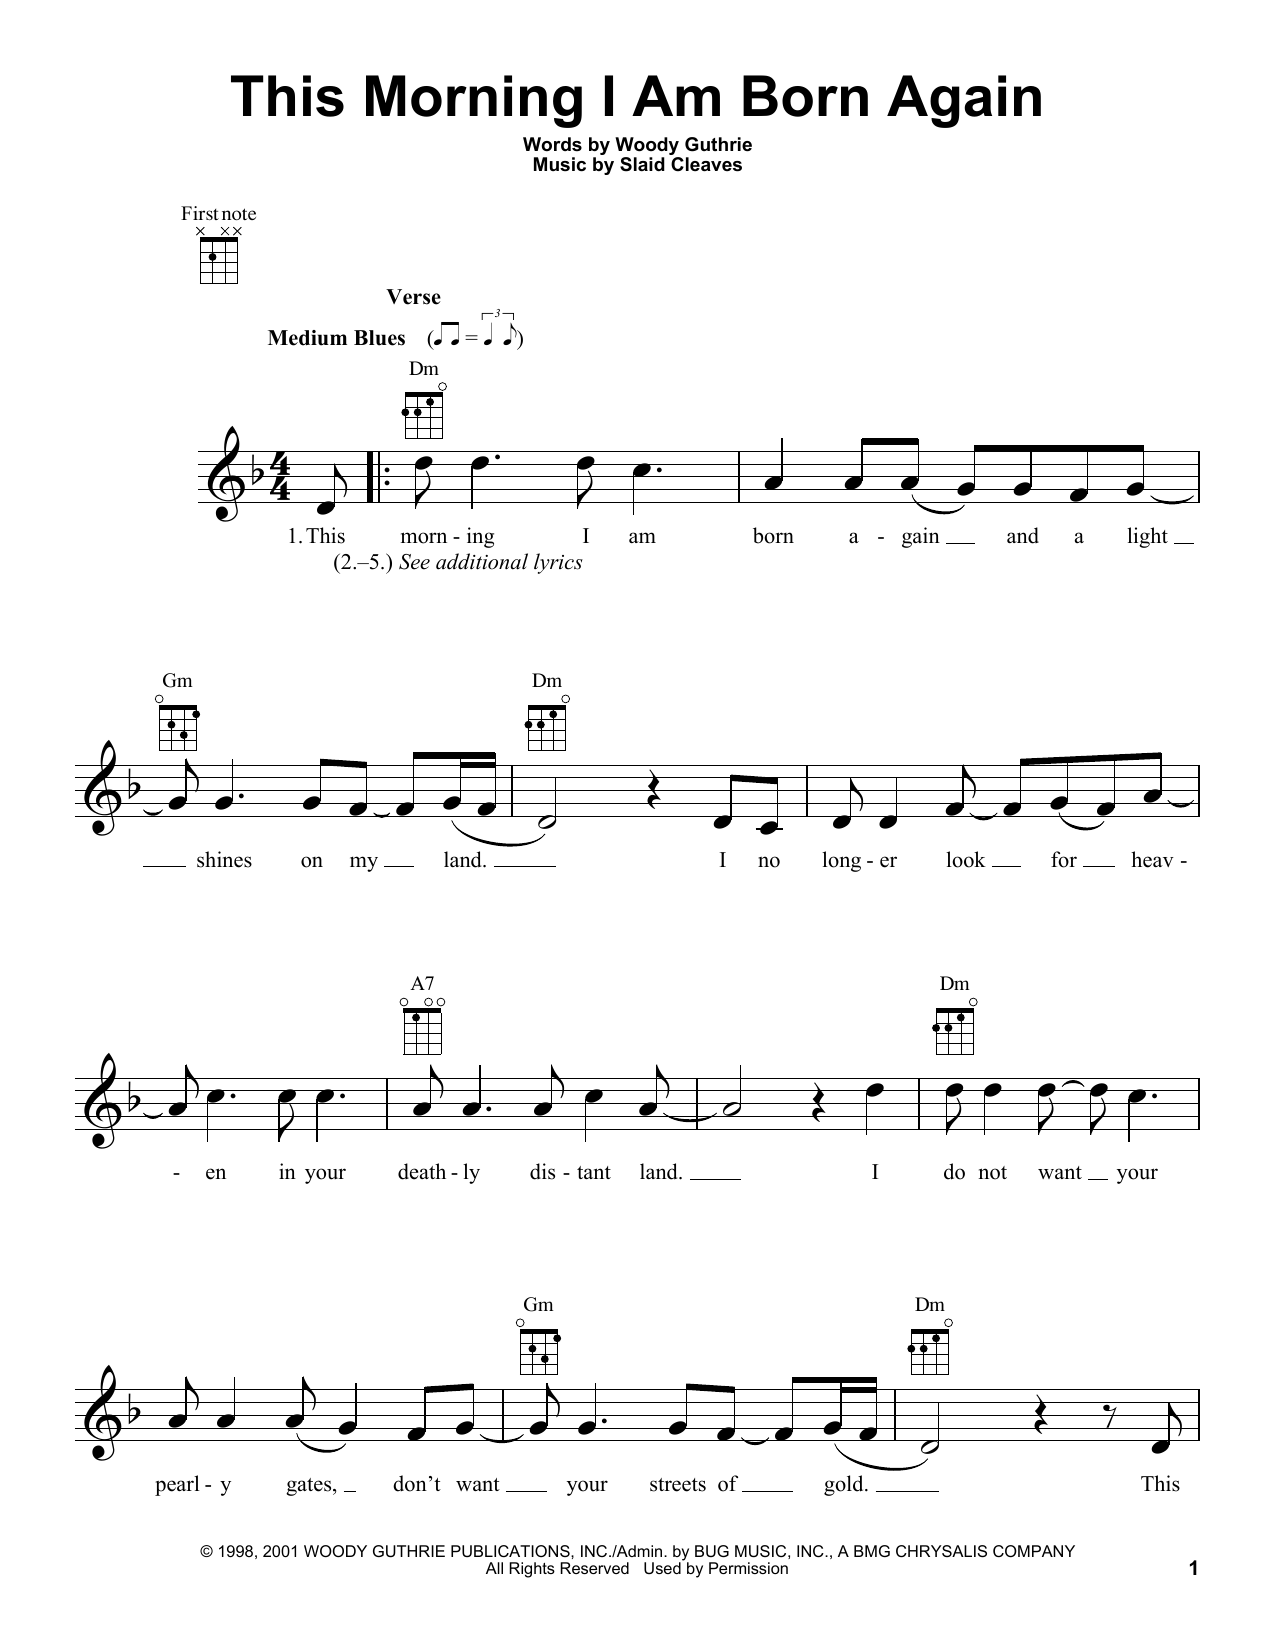 Download Woody Guthrie This Morning I Am Born Again Sheet Music